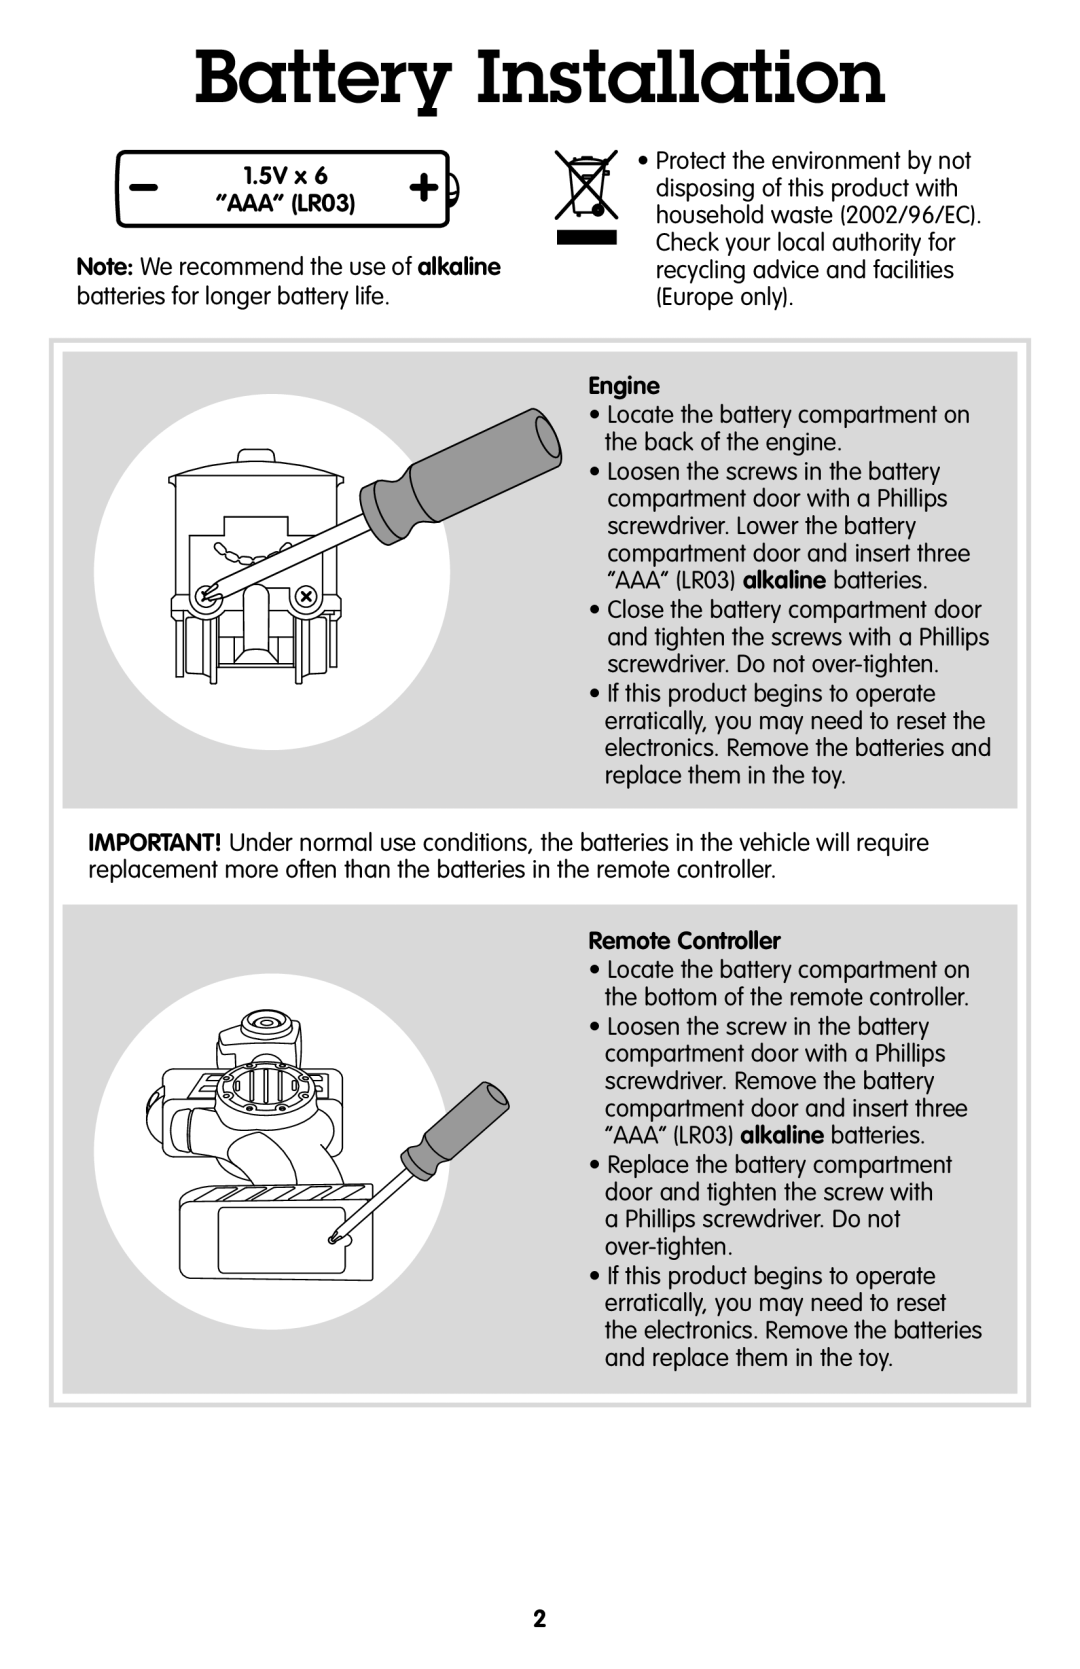 Fisher-Price R9107 instruction sheet Battery Installation, 1.5V x “AAA” LR03, Engine, Remote Controller 